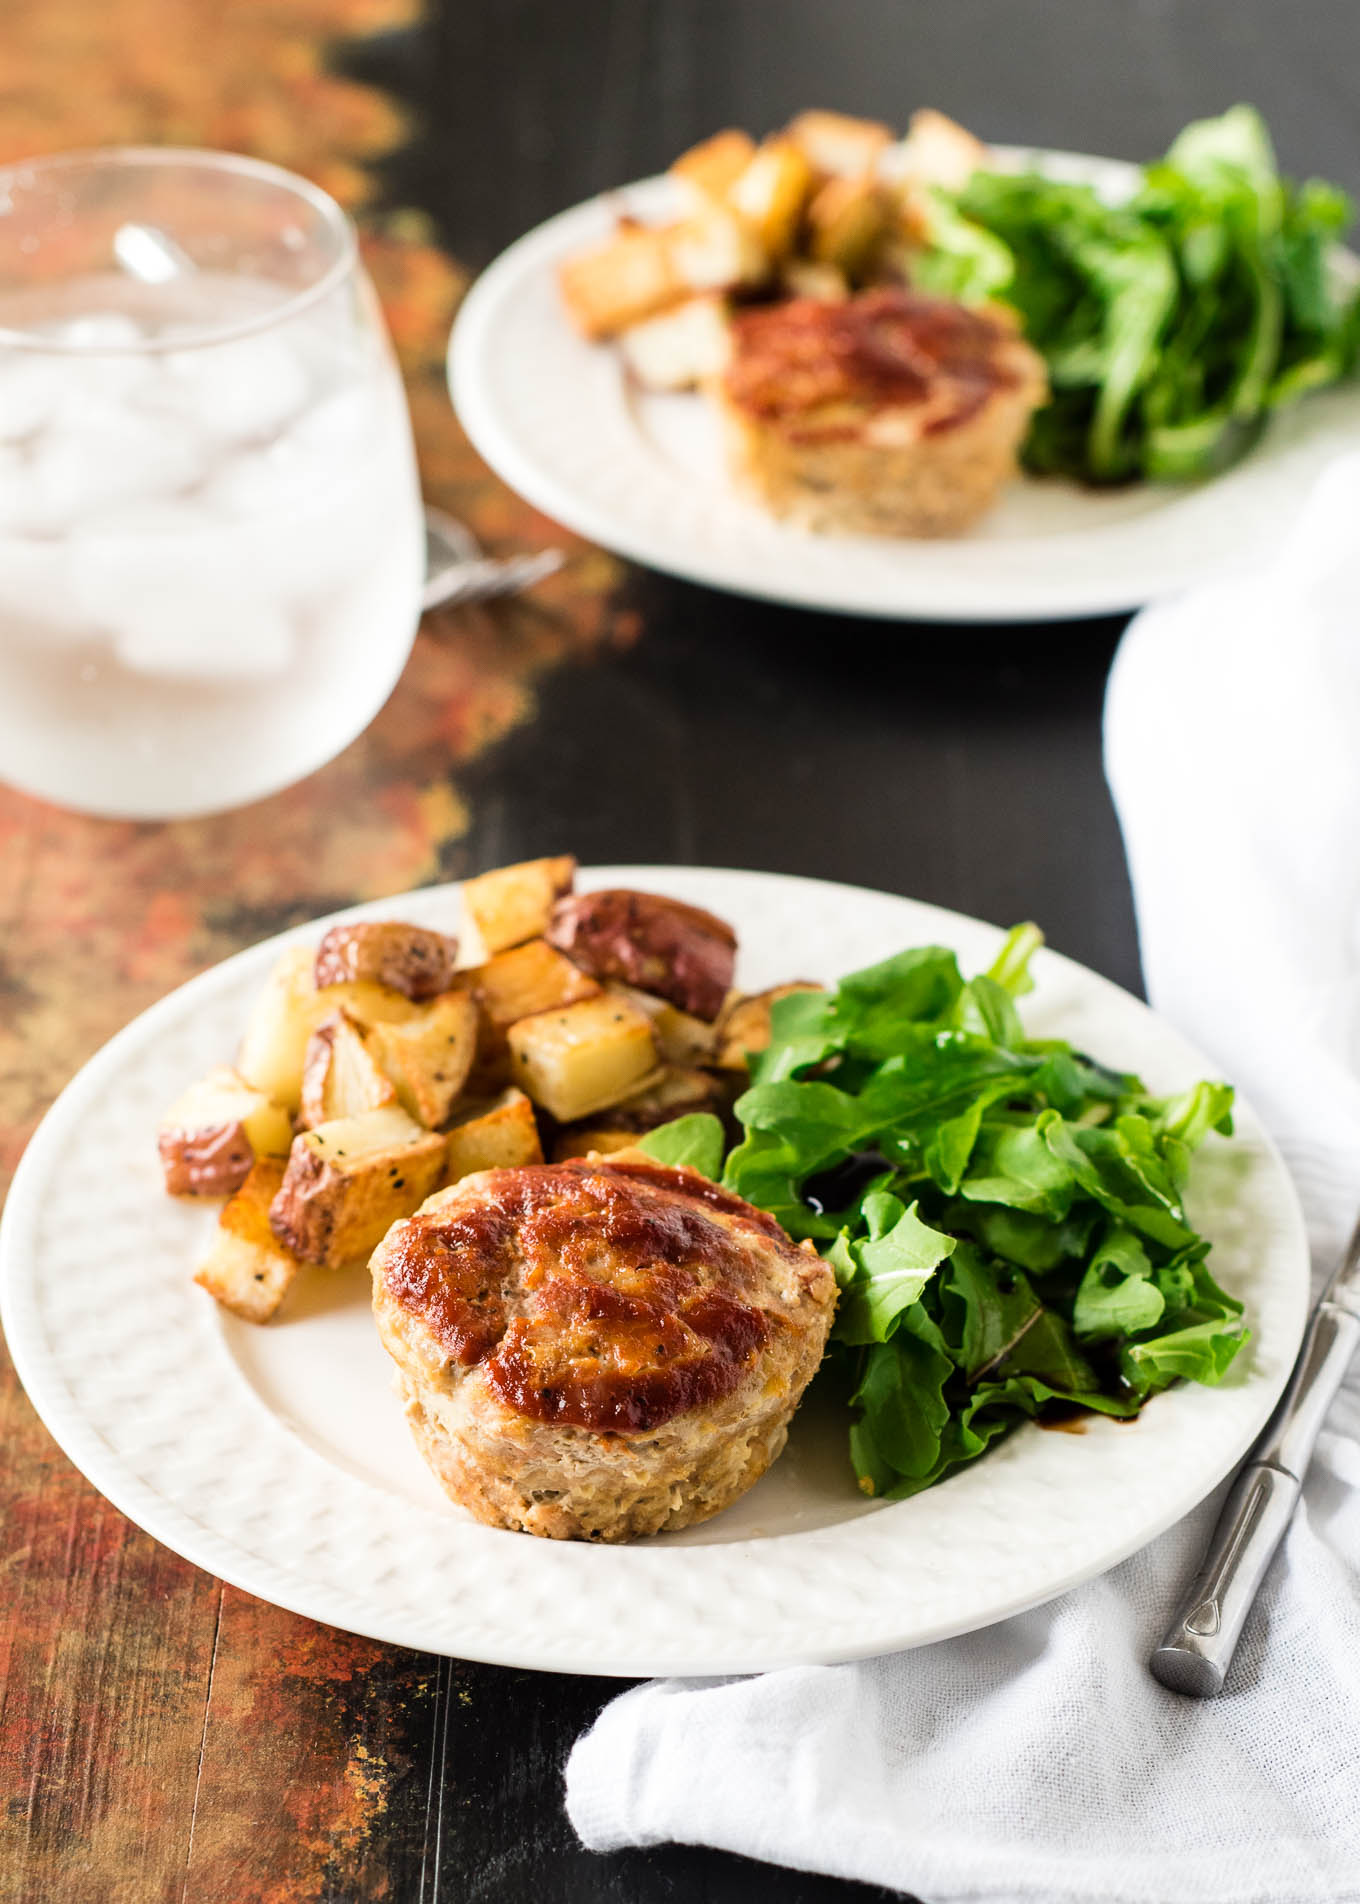 Turkey Meatloaf Muffins are high protein, individual portions of your favorite comfort food, lightened up a bit- a great kid-friendly or meal prep dish.